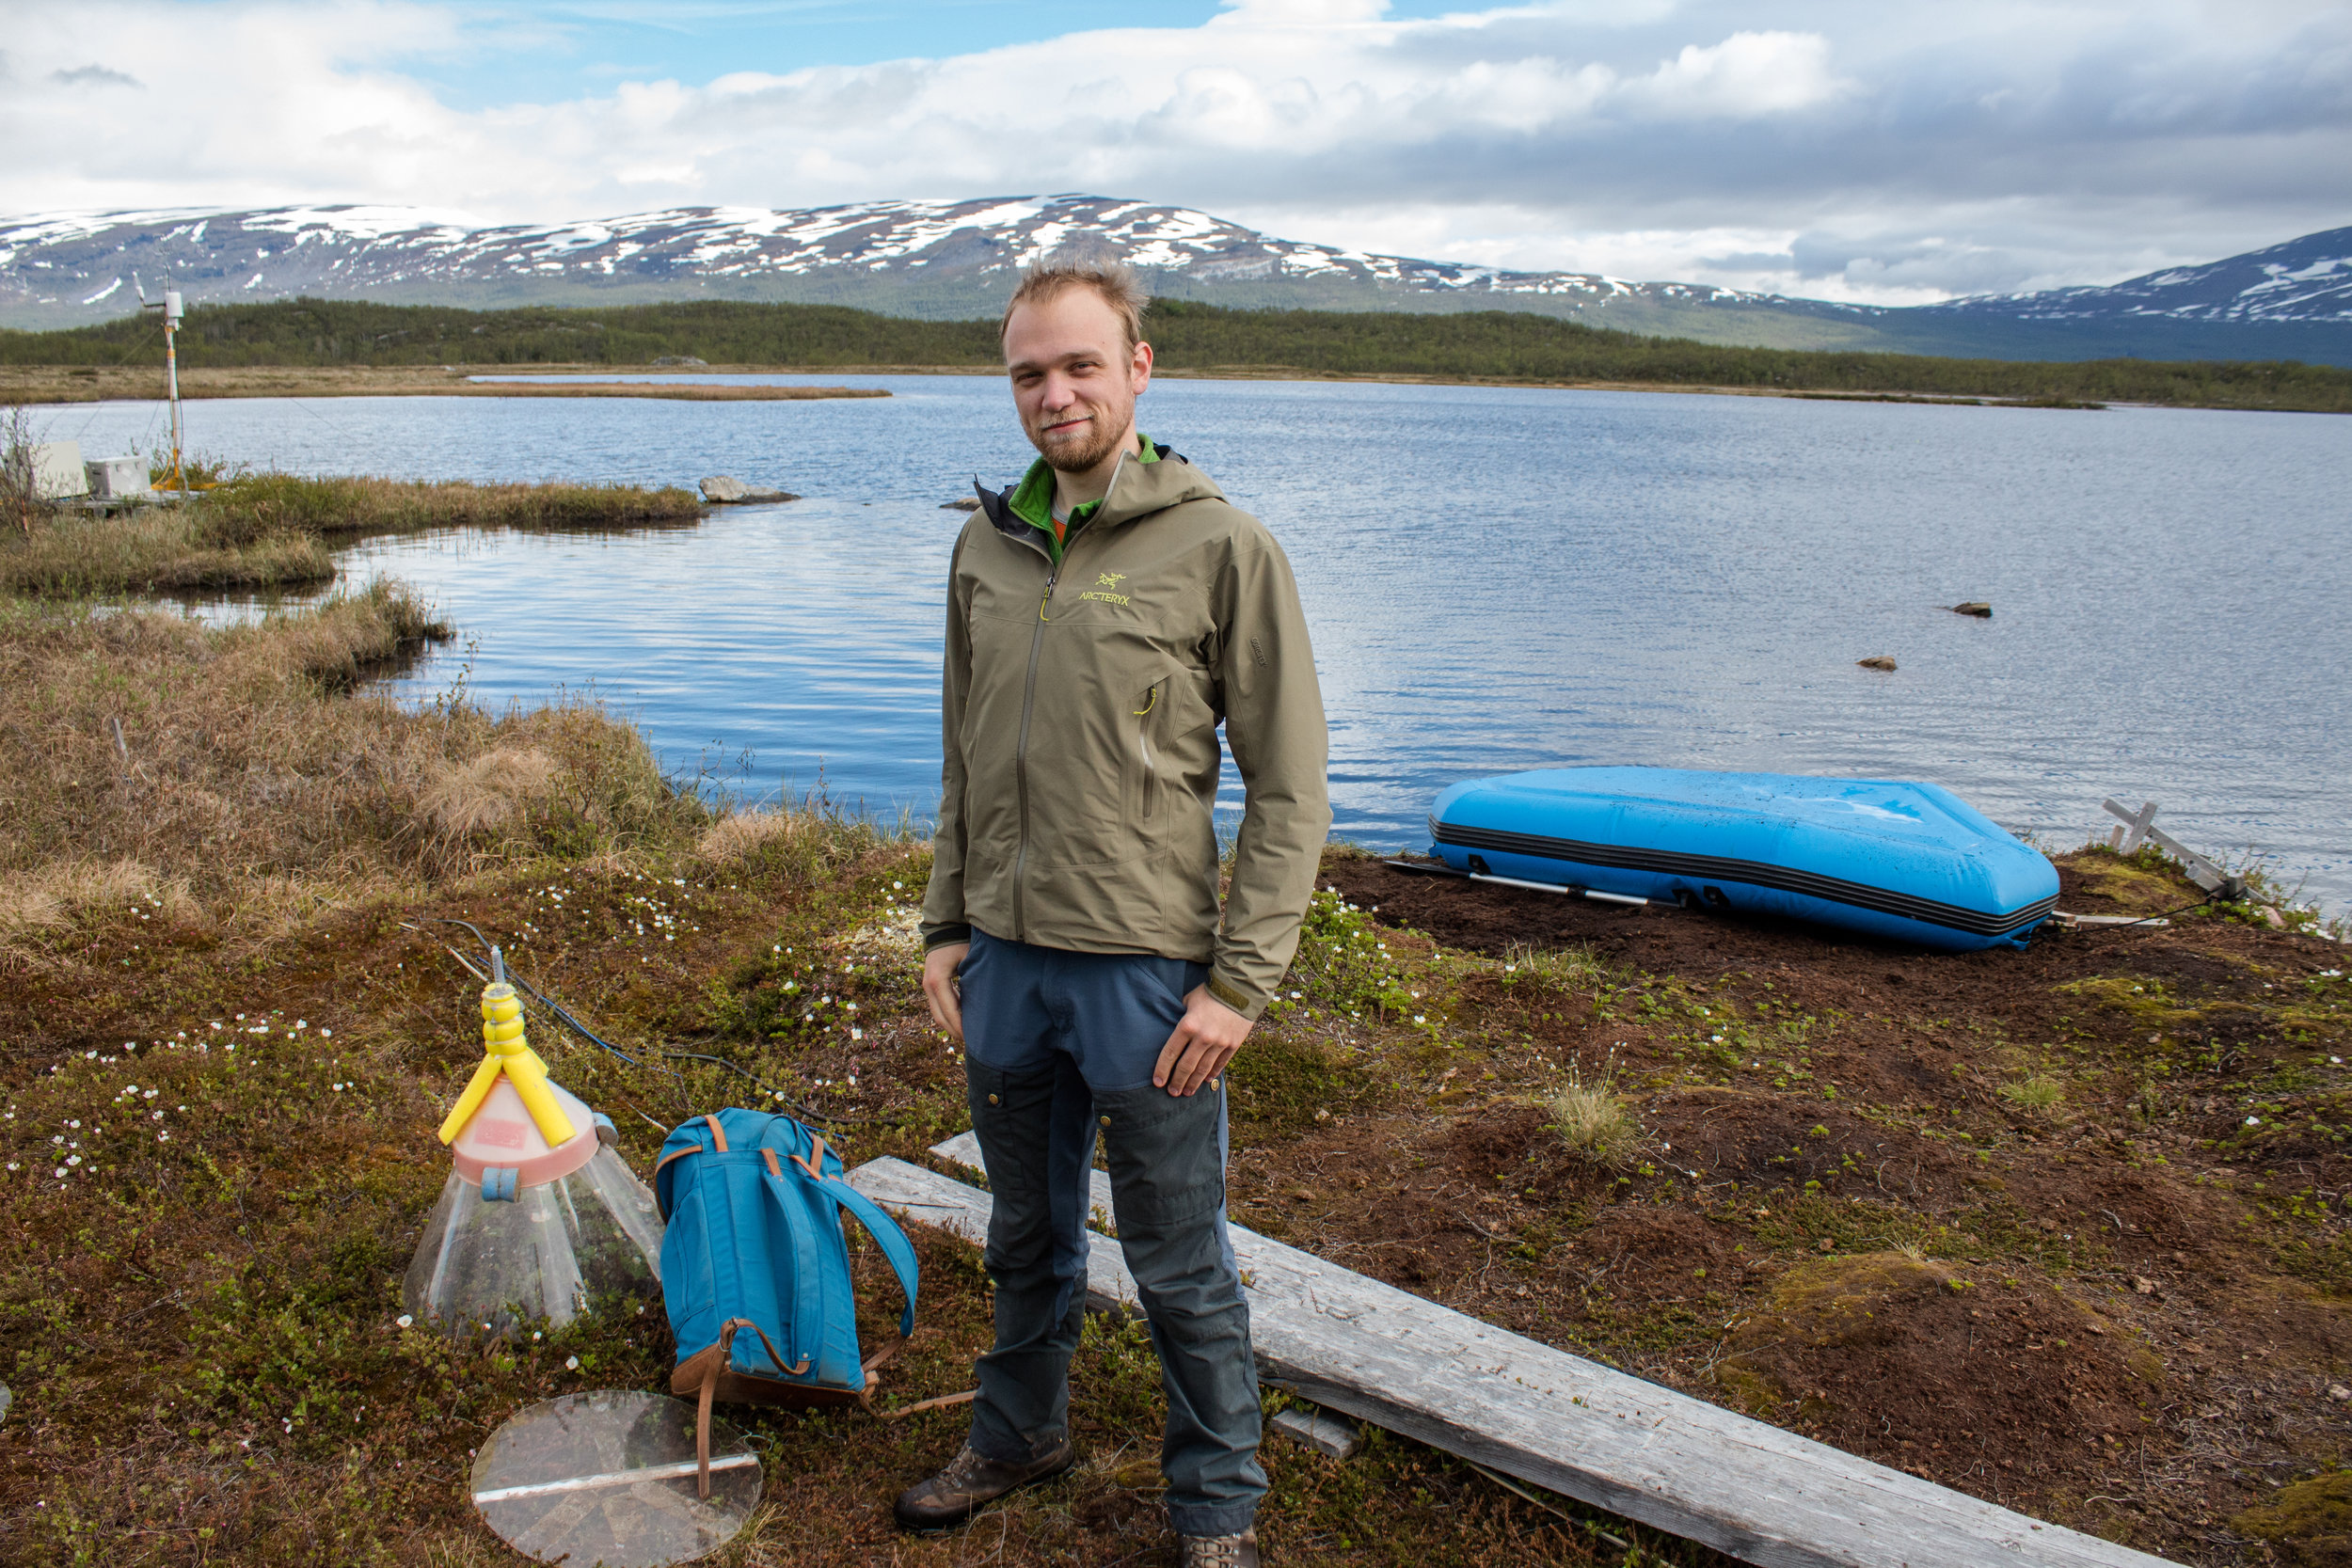 Joachim Jansen is a PhD student at Stockholm University who studies methane releases from Arctic lakes and wetlands.